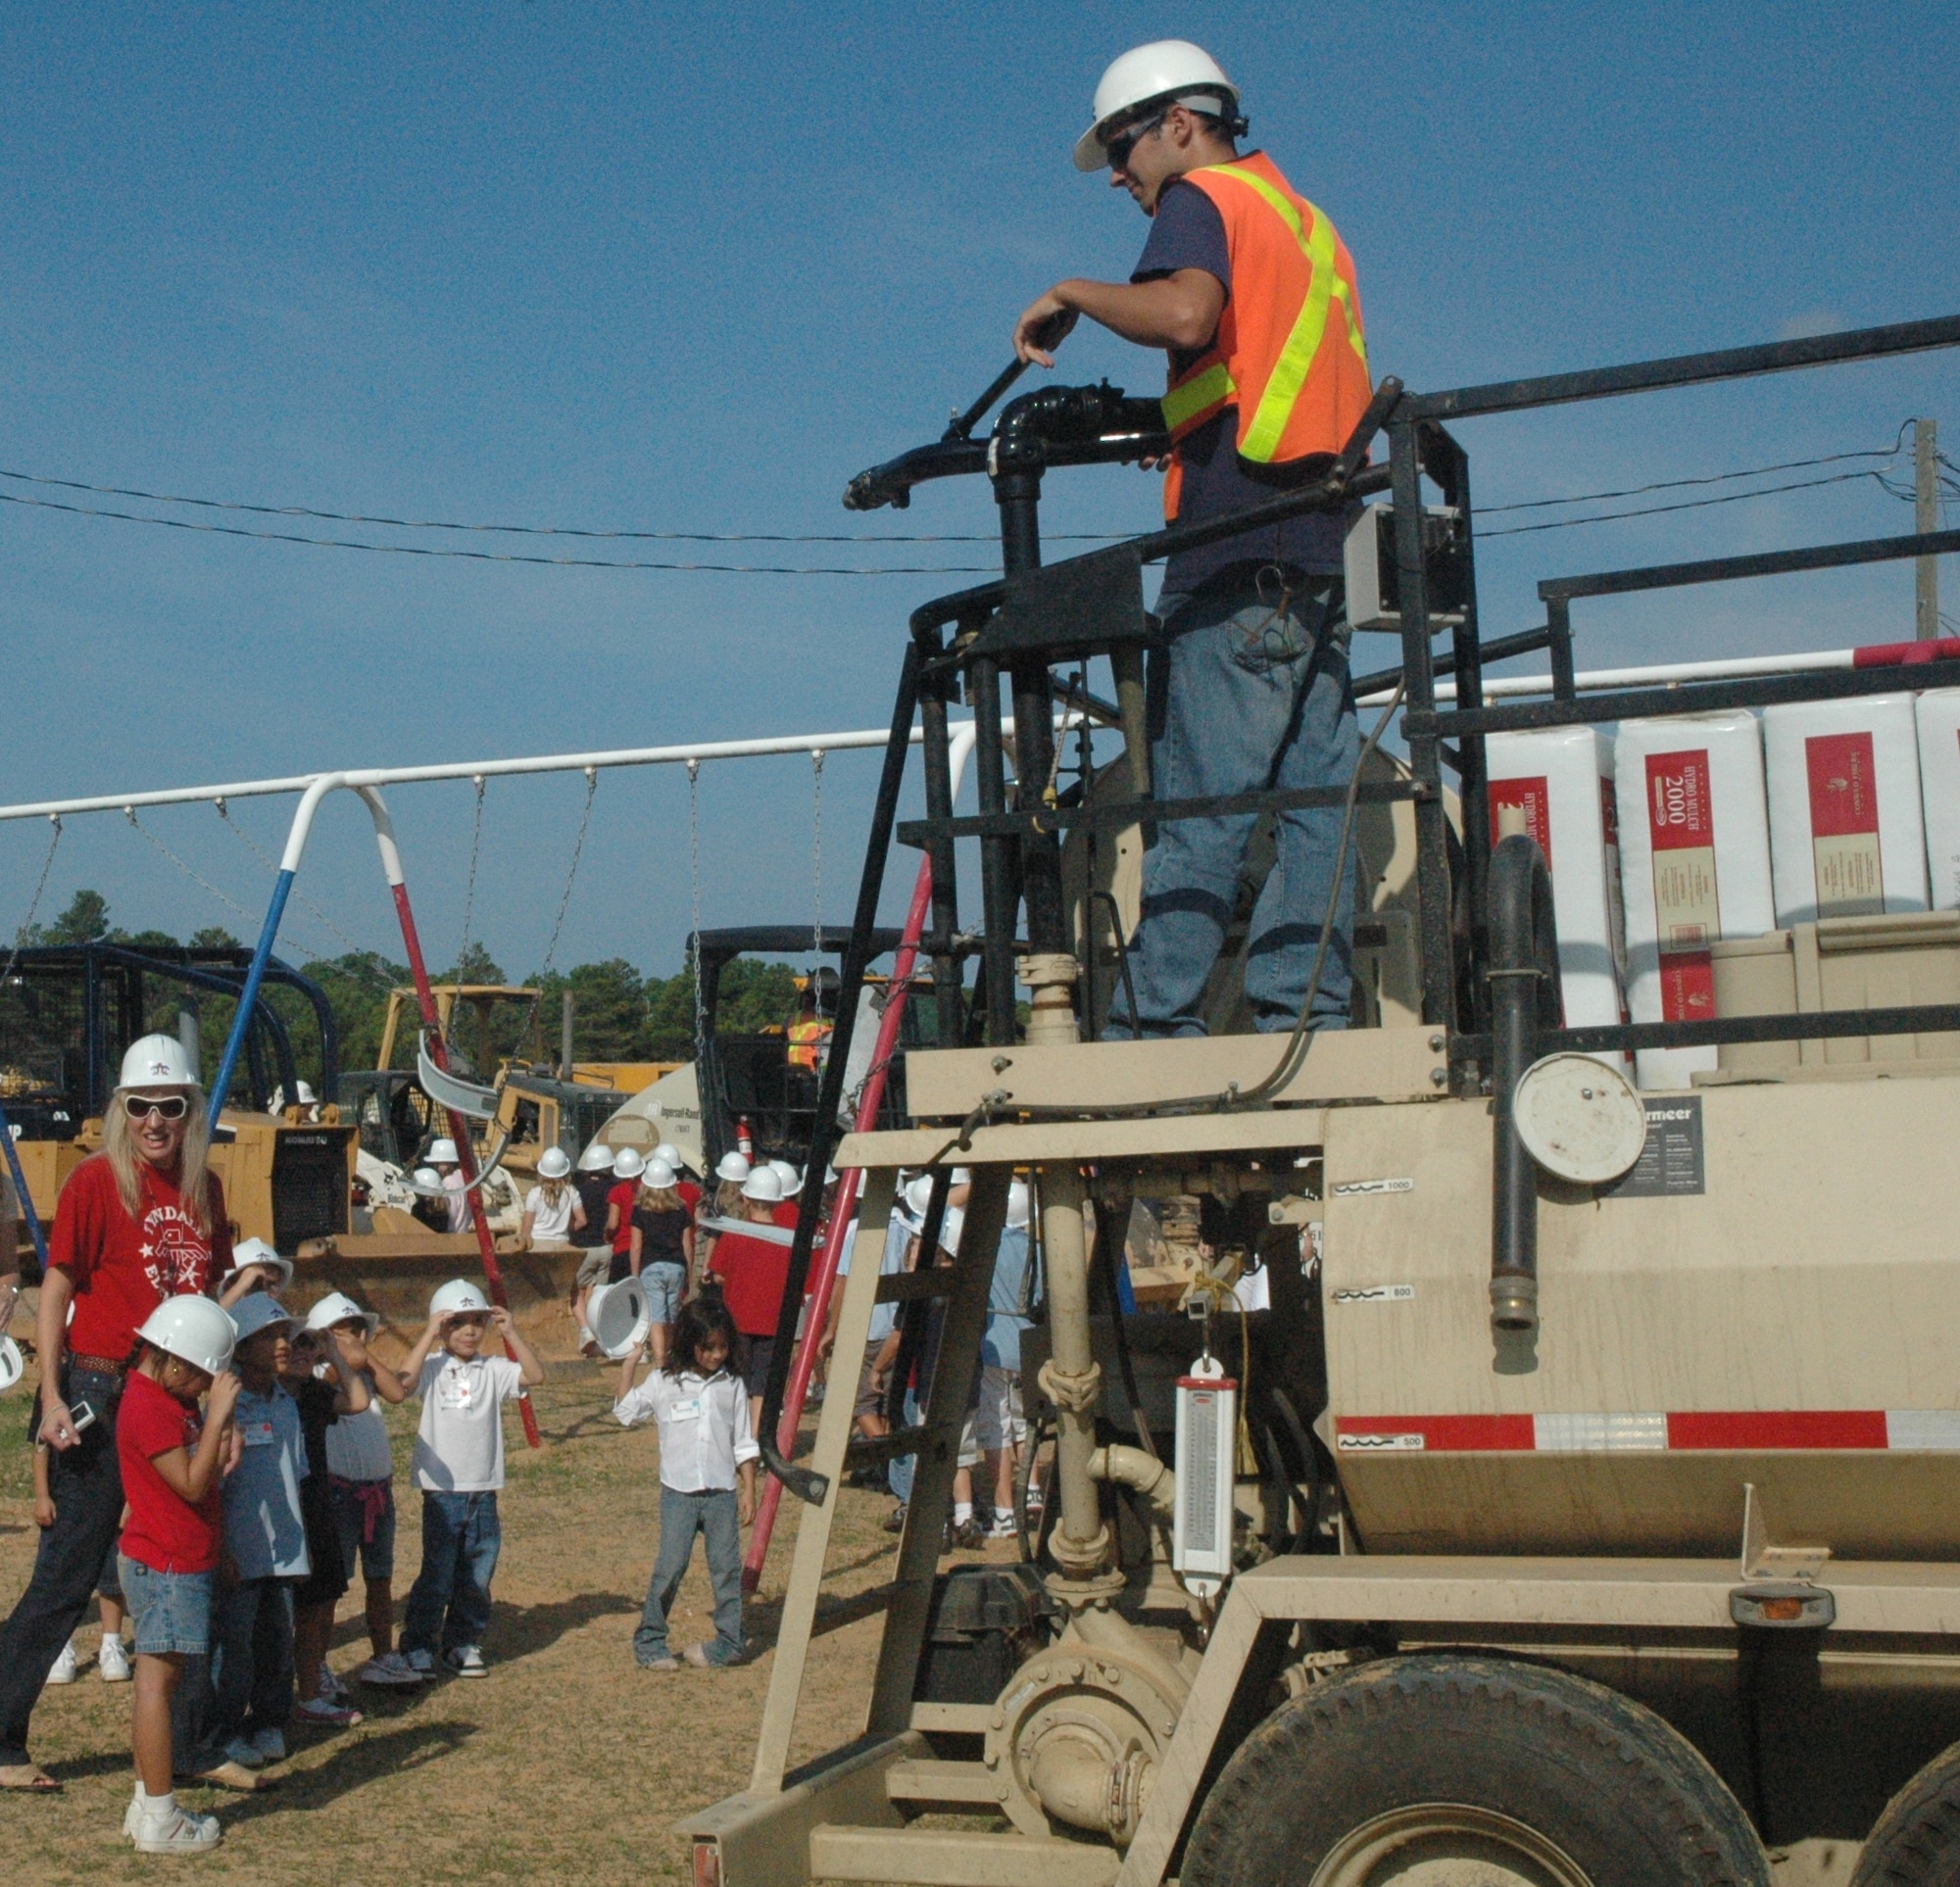 Tyndall Elementary students from kindergarten to fifth grade explore construction equipment outside the school Sept. 10.  The children and staff all wore thunderbird hard hats to witness the heavy machinery in action.   (U.S. Air Force photo/Airman 1st Class Veronica McMahon)  